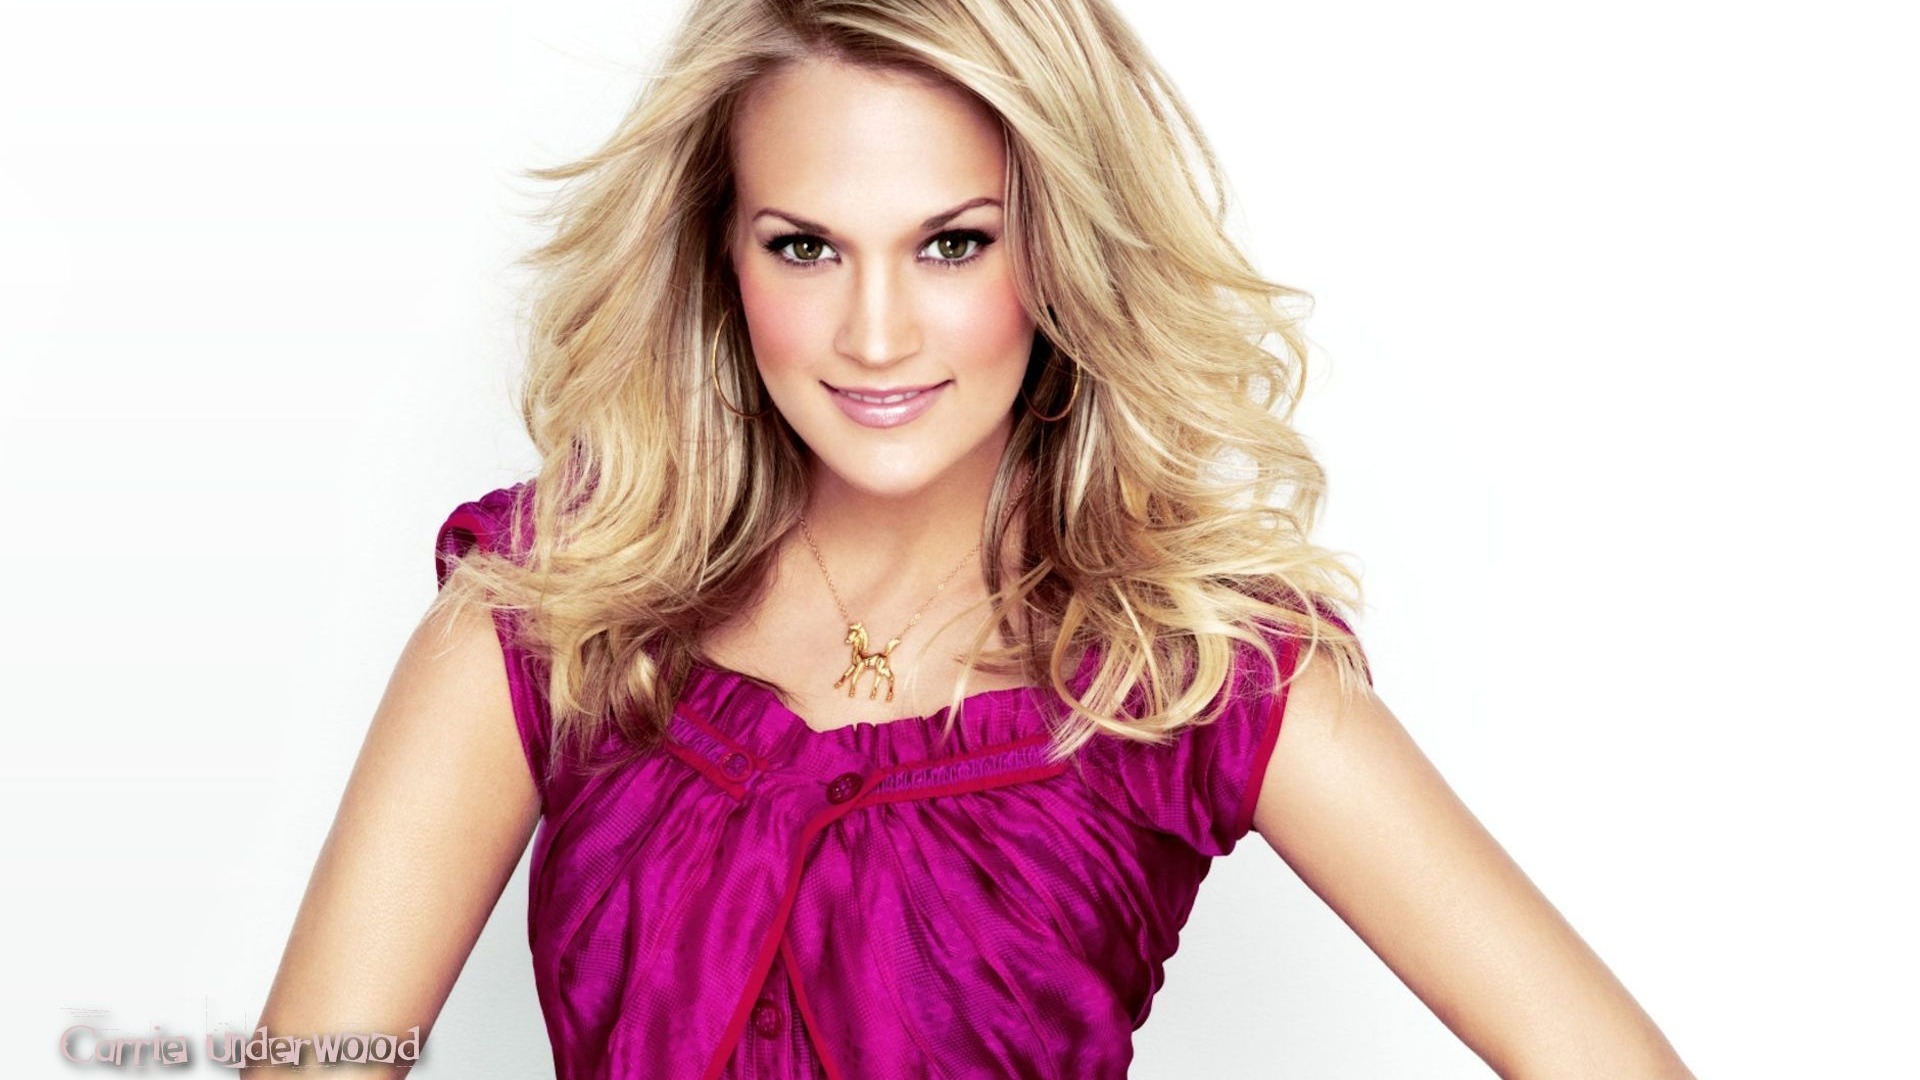 Carrie Underwood #002 - 1920x1080 Wallpapers Pictures Photos Images